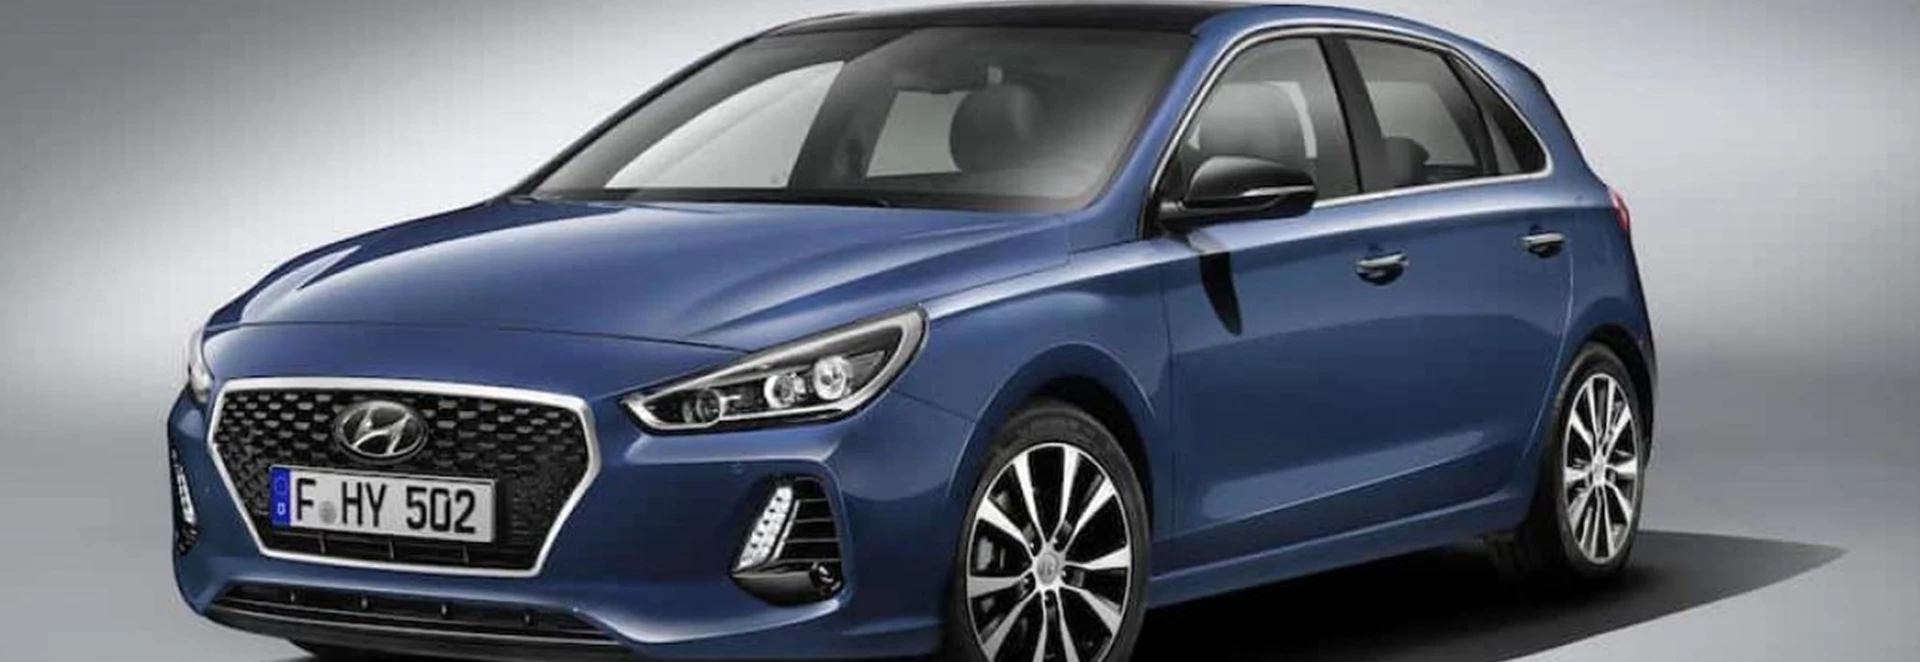 The 2017 Hyundai i30 has been unveiled